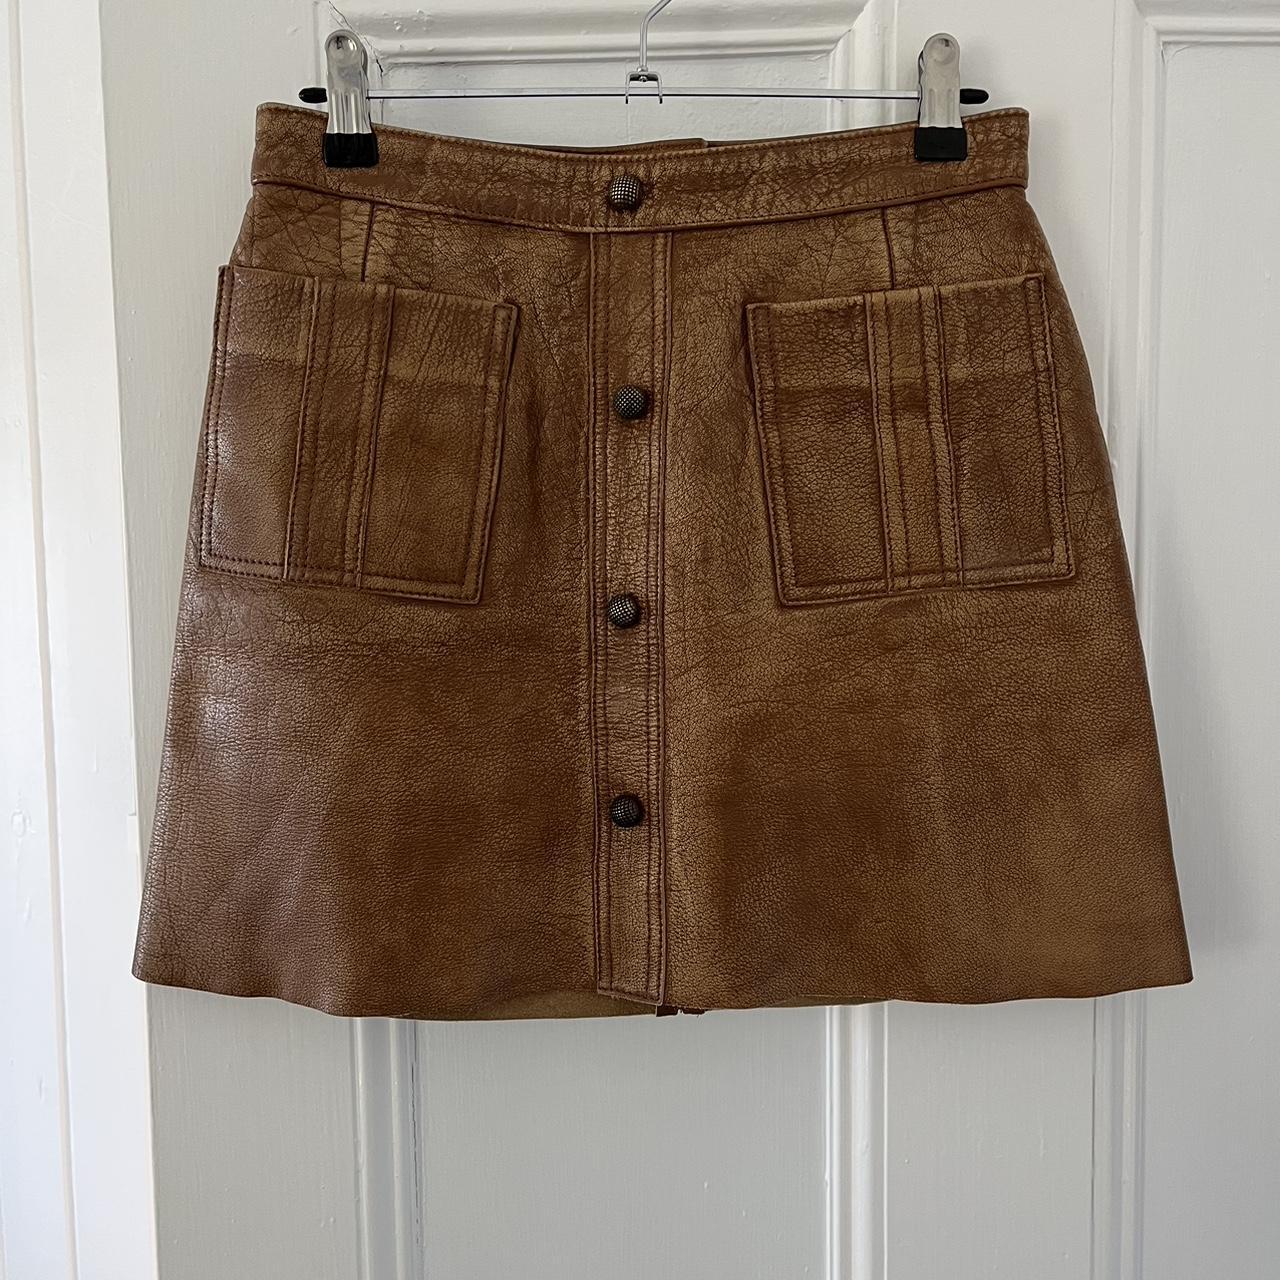 AJE brown leather skirt Size 8 Too small for me - Depop